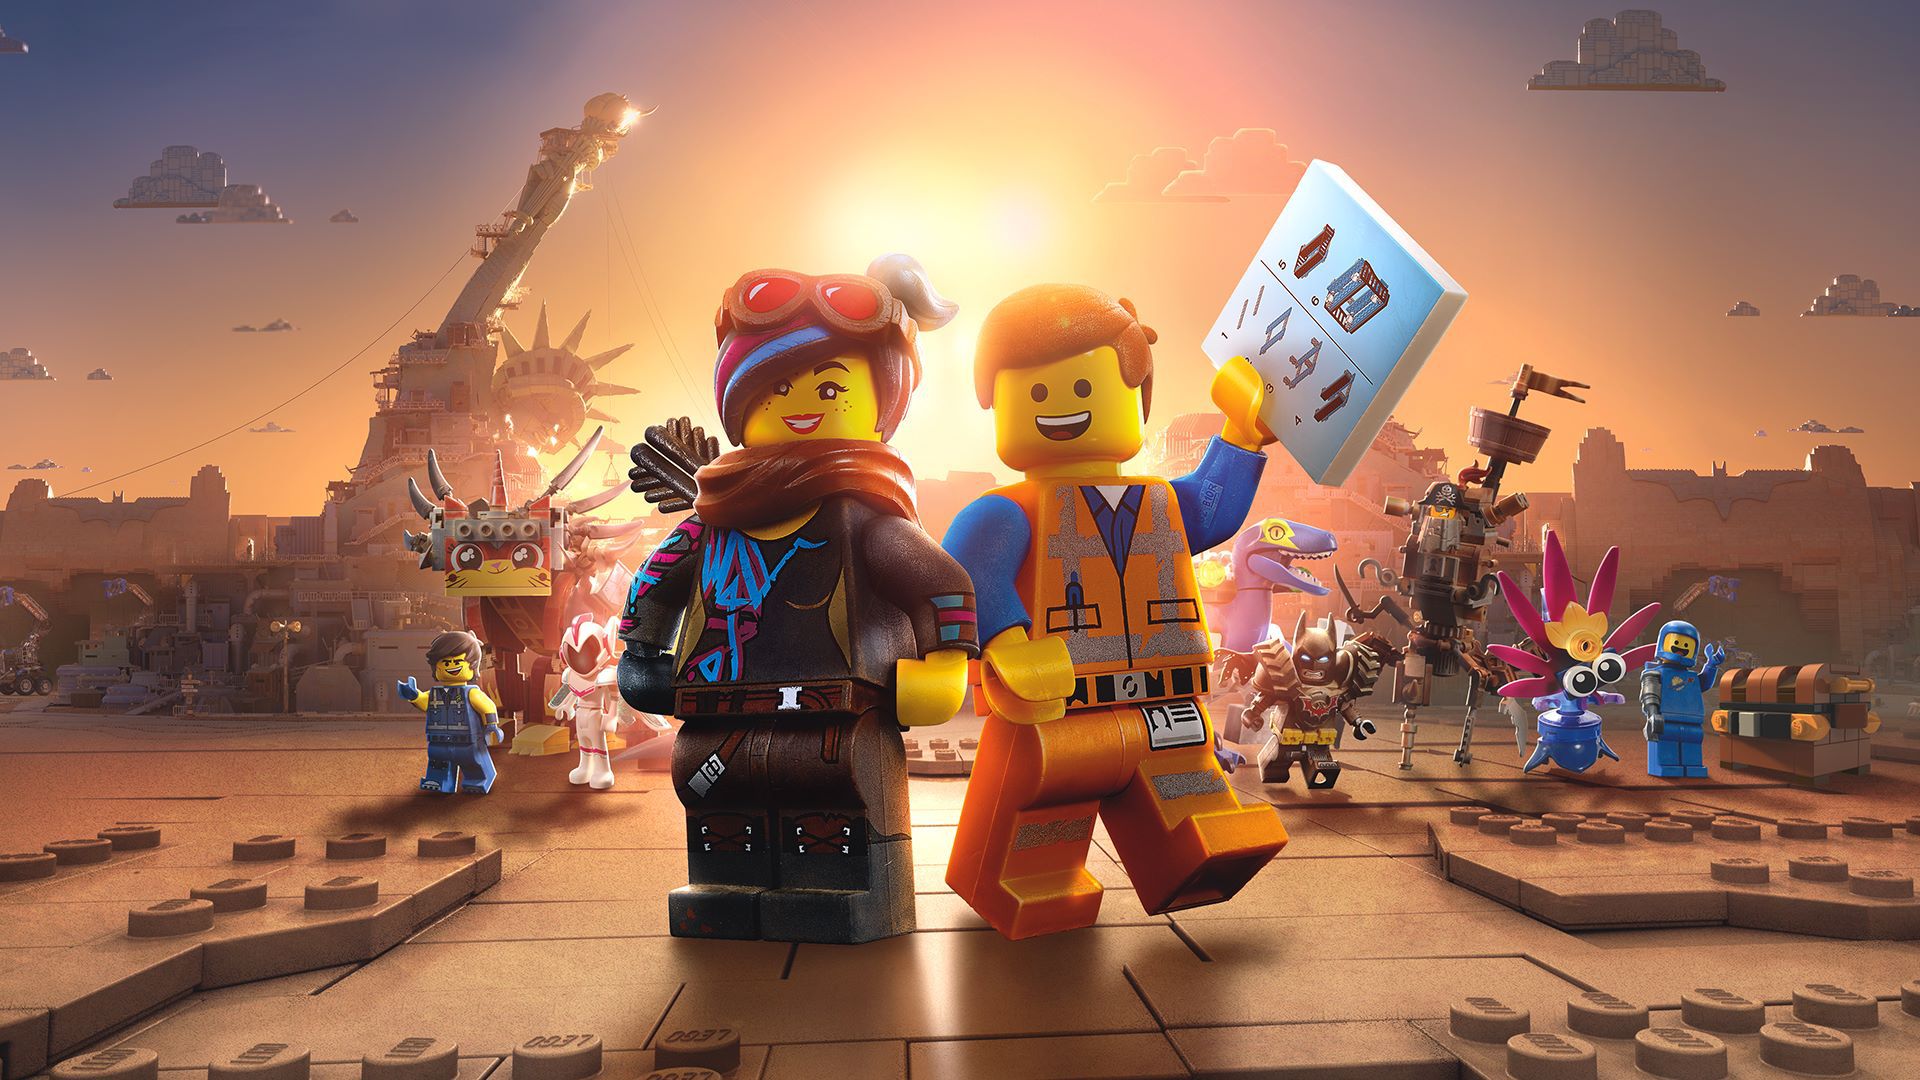 the lego movie 2: the second part, wyldstyle (the lego movie), movie, emmet (the lego movie)